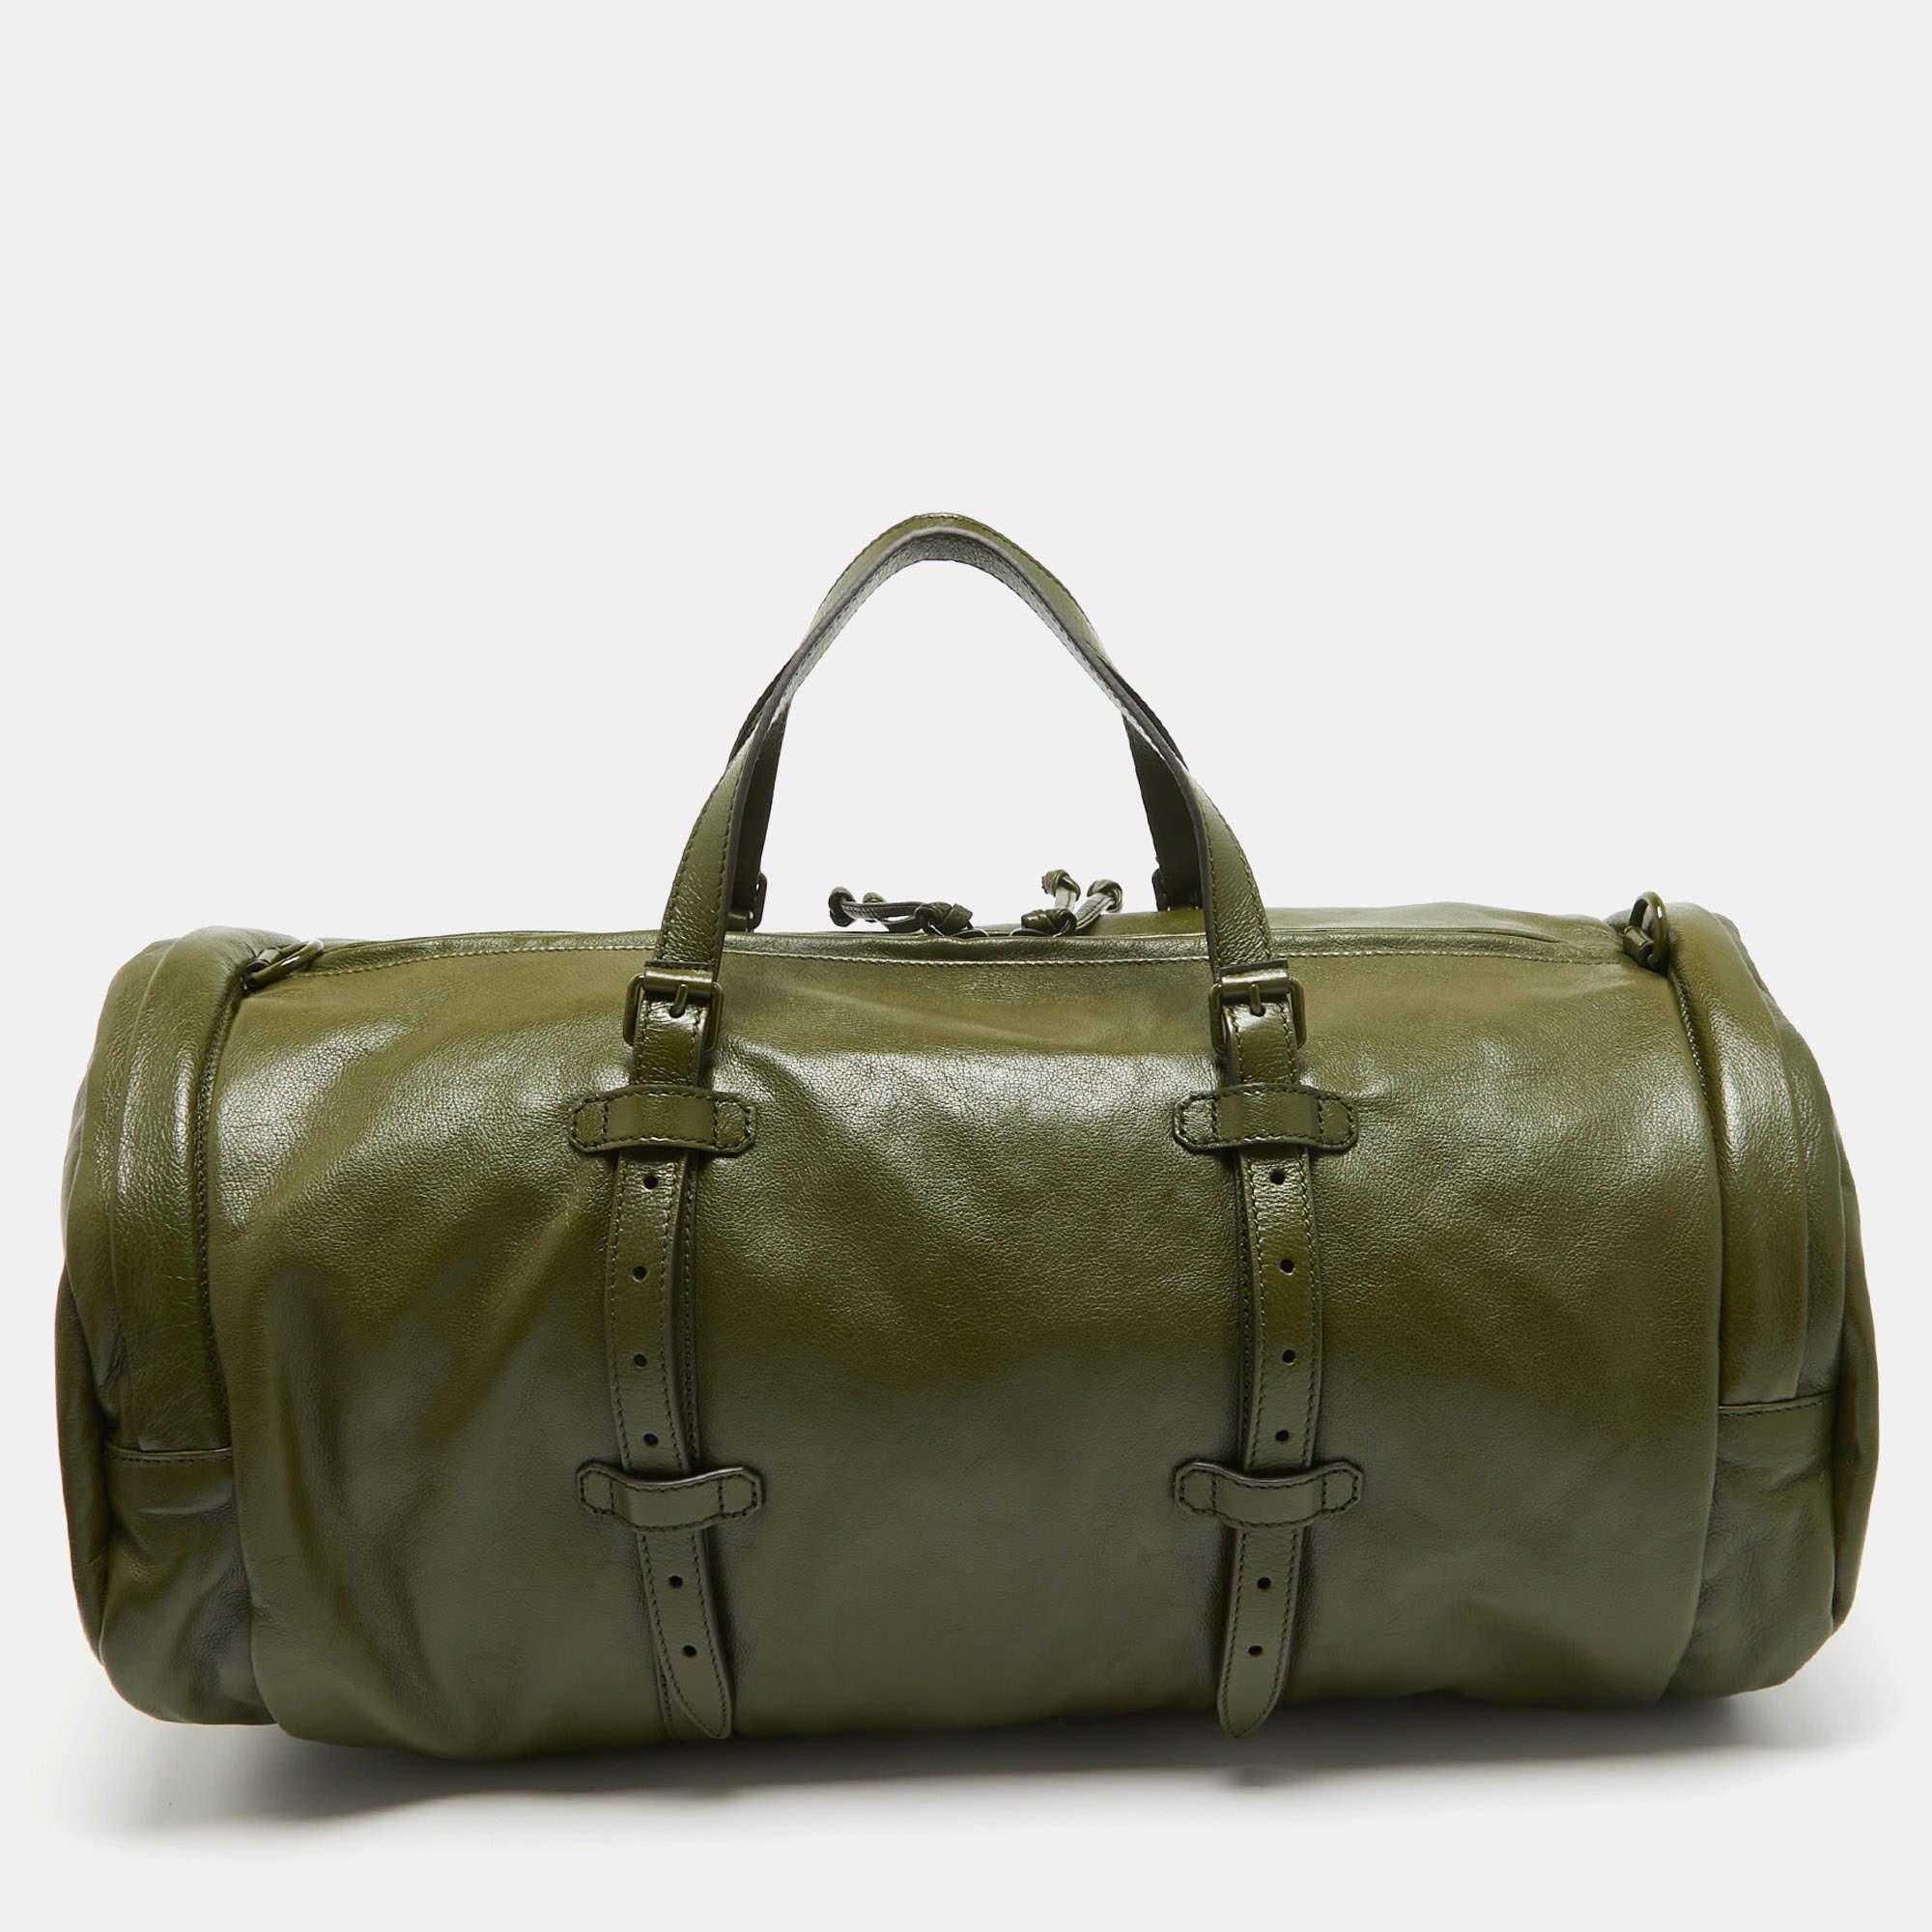 Gucci Green Leather Large Tonal Double G Duffle Bag 7